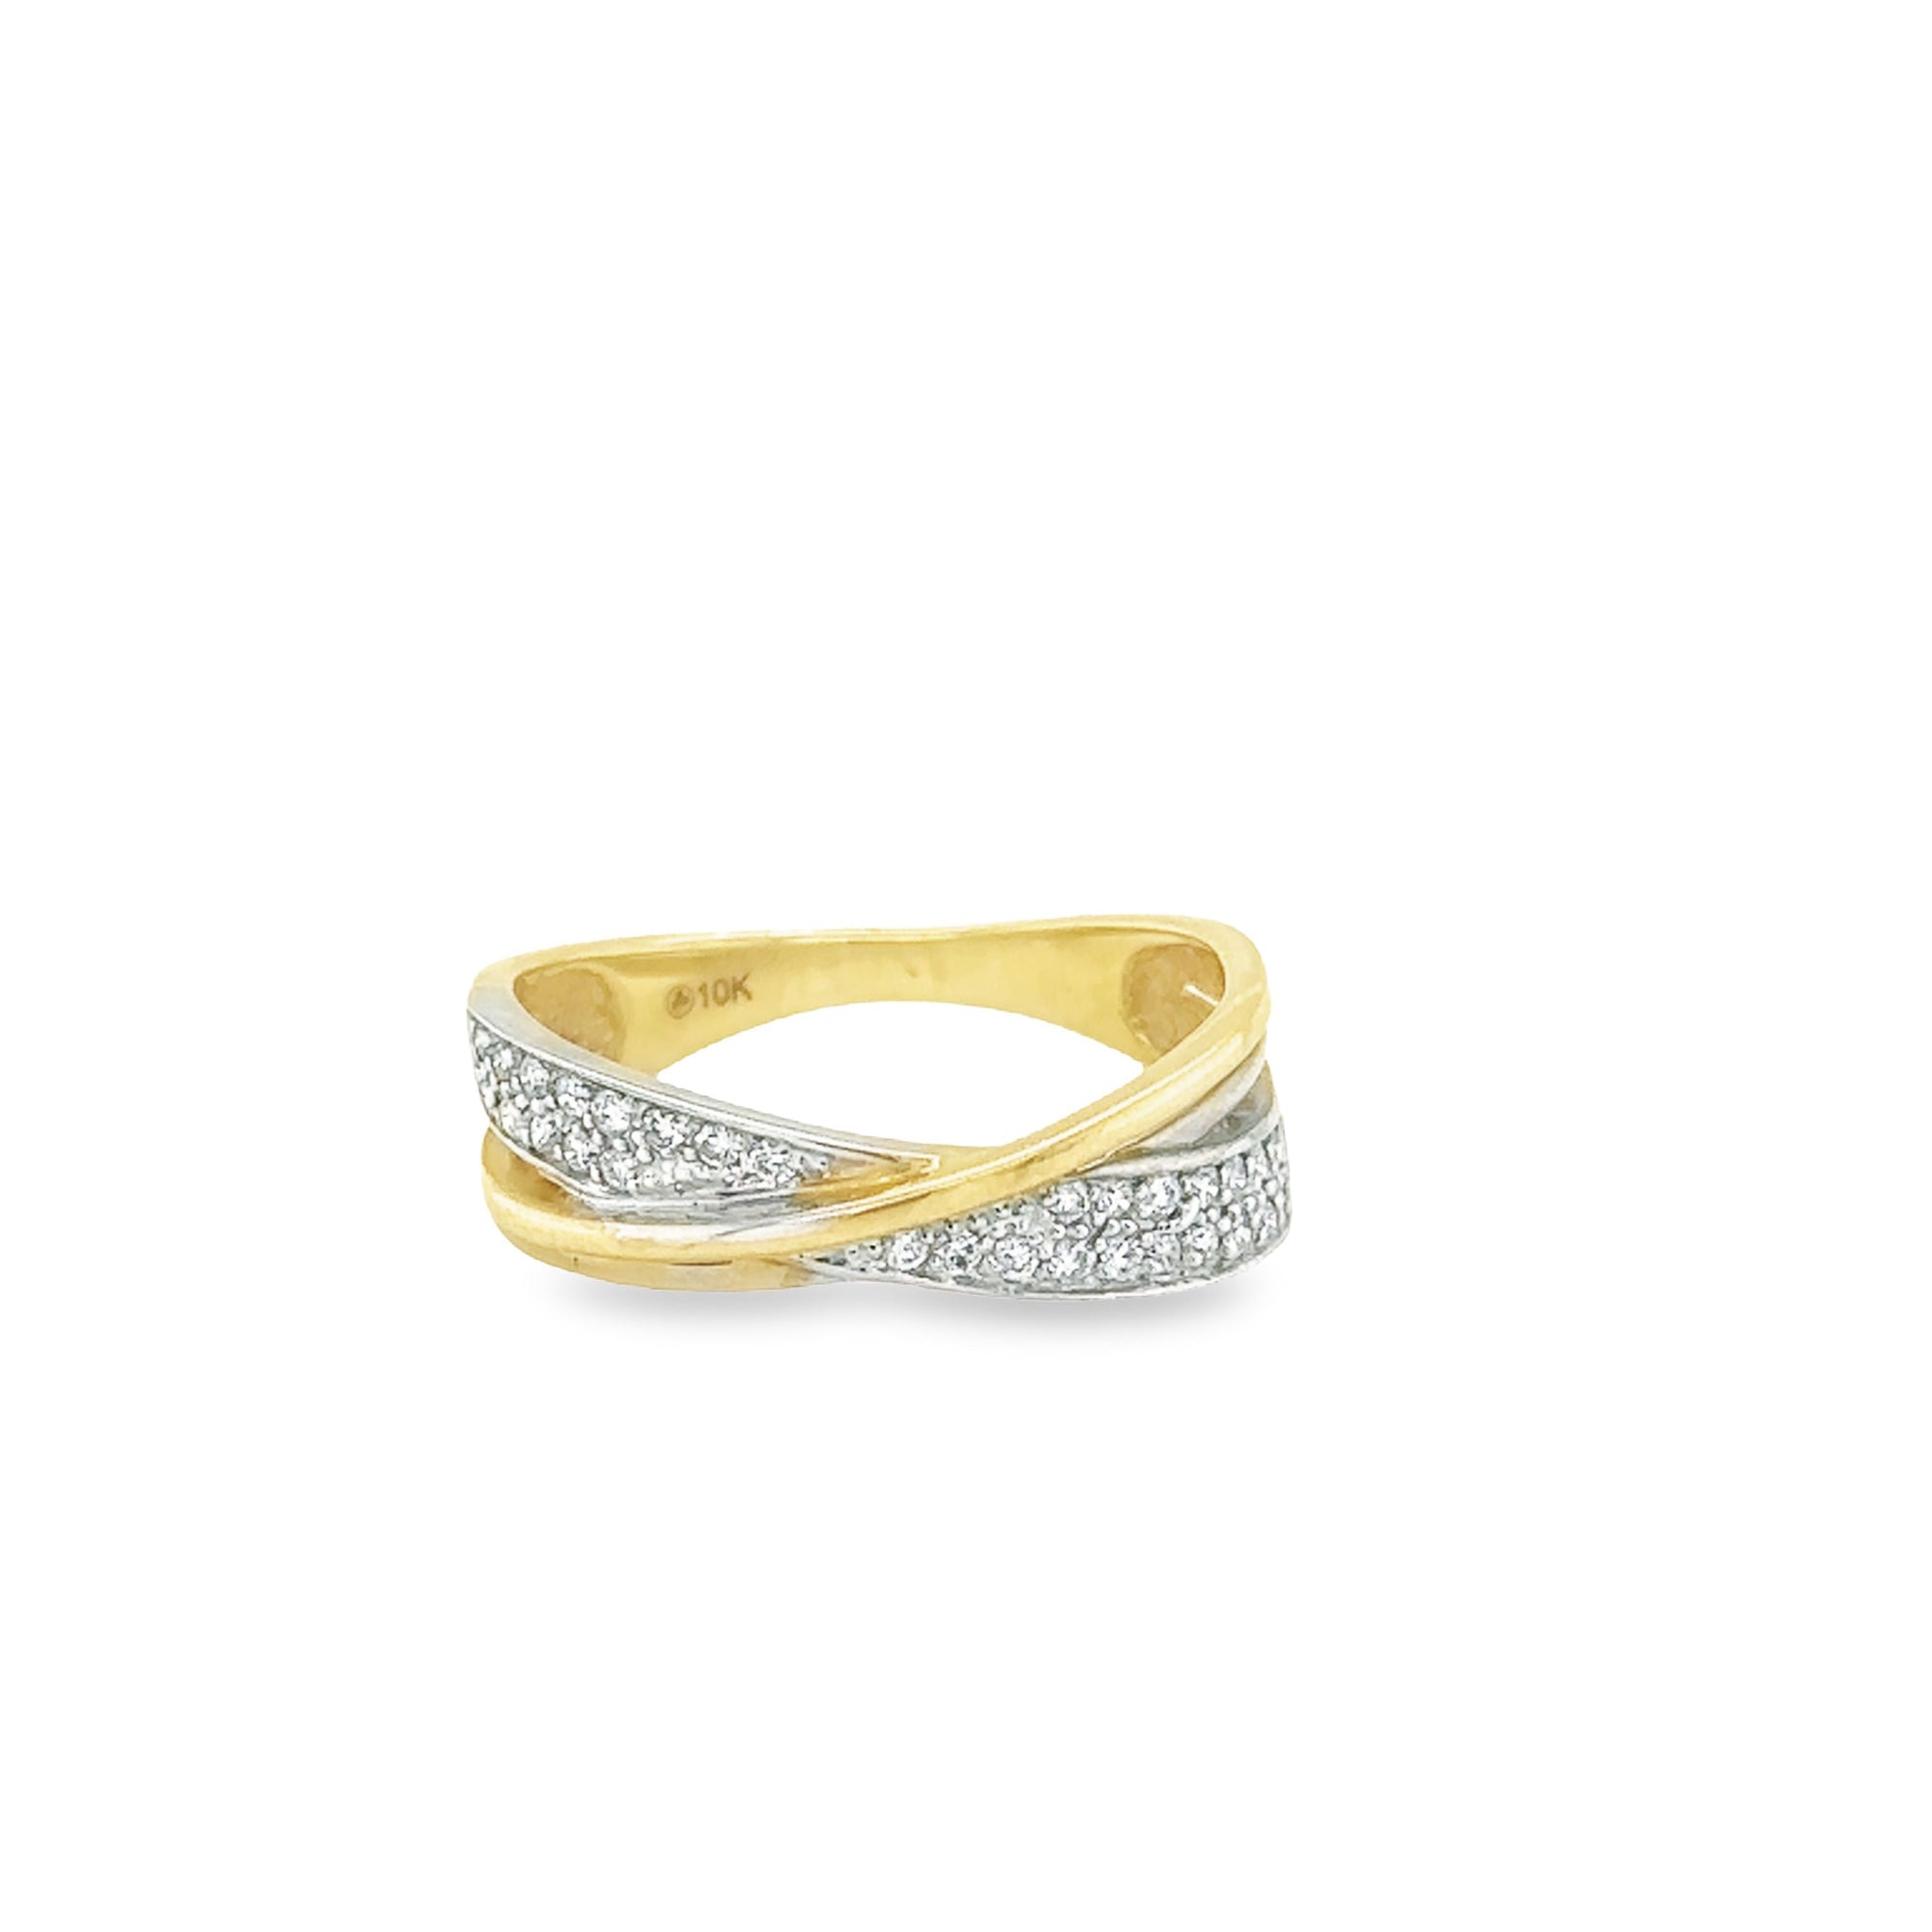 10K Yellow and White Gold Diamond Ring with 0.19TDW Modern Design